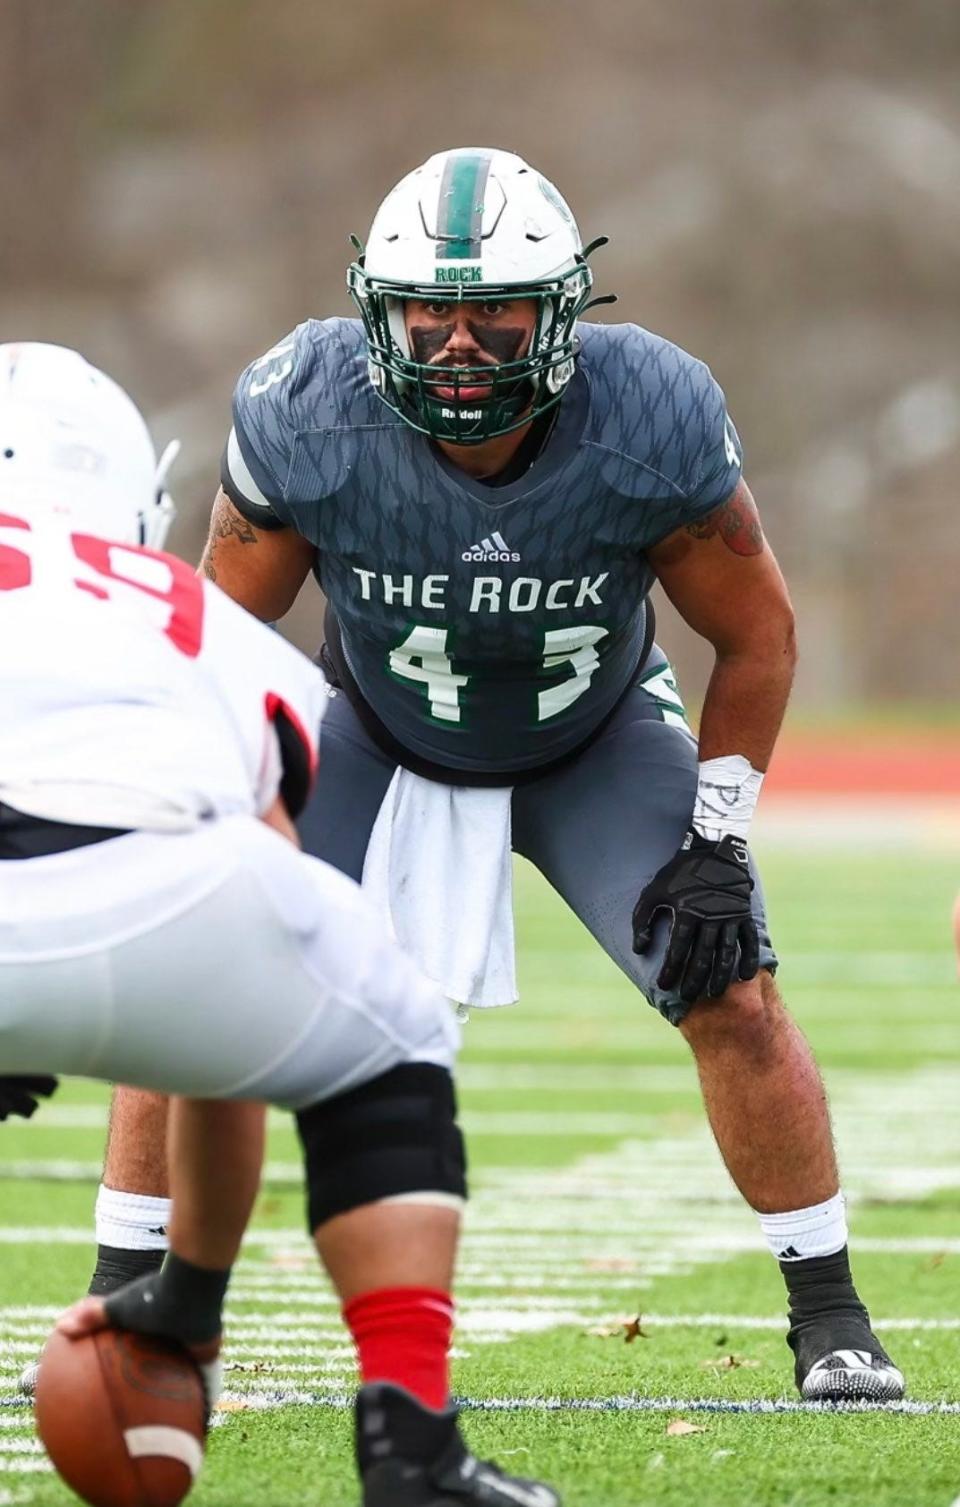 Slippery Rock linebacker Cody Ross lines up before the start of a play for The Rock.